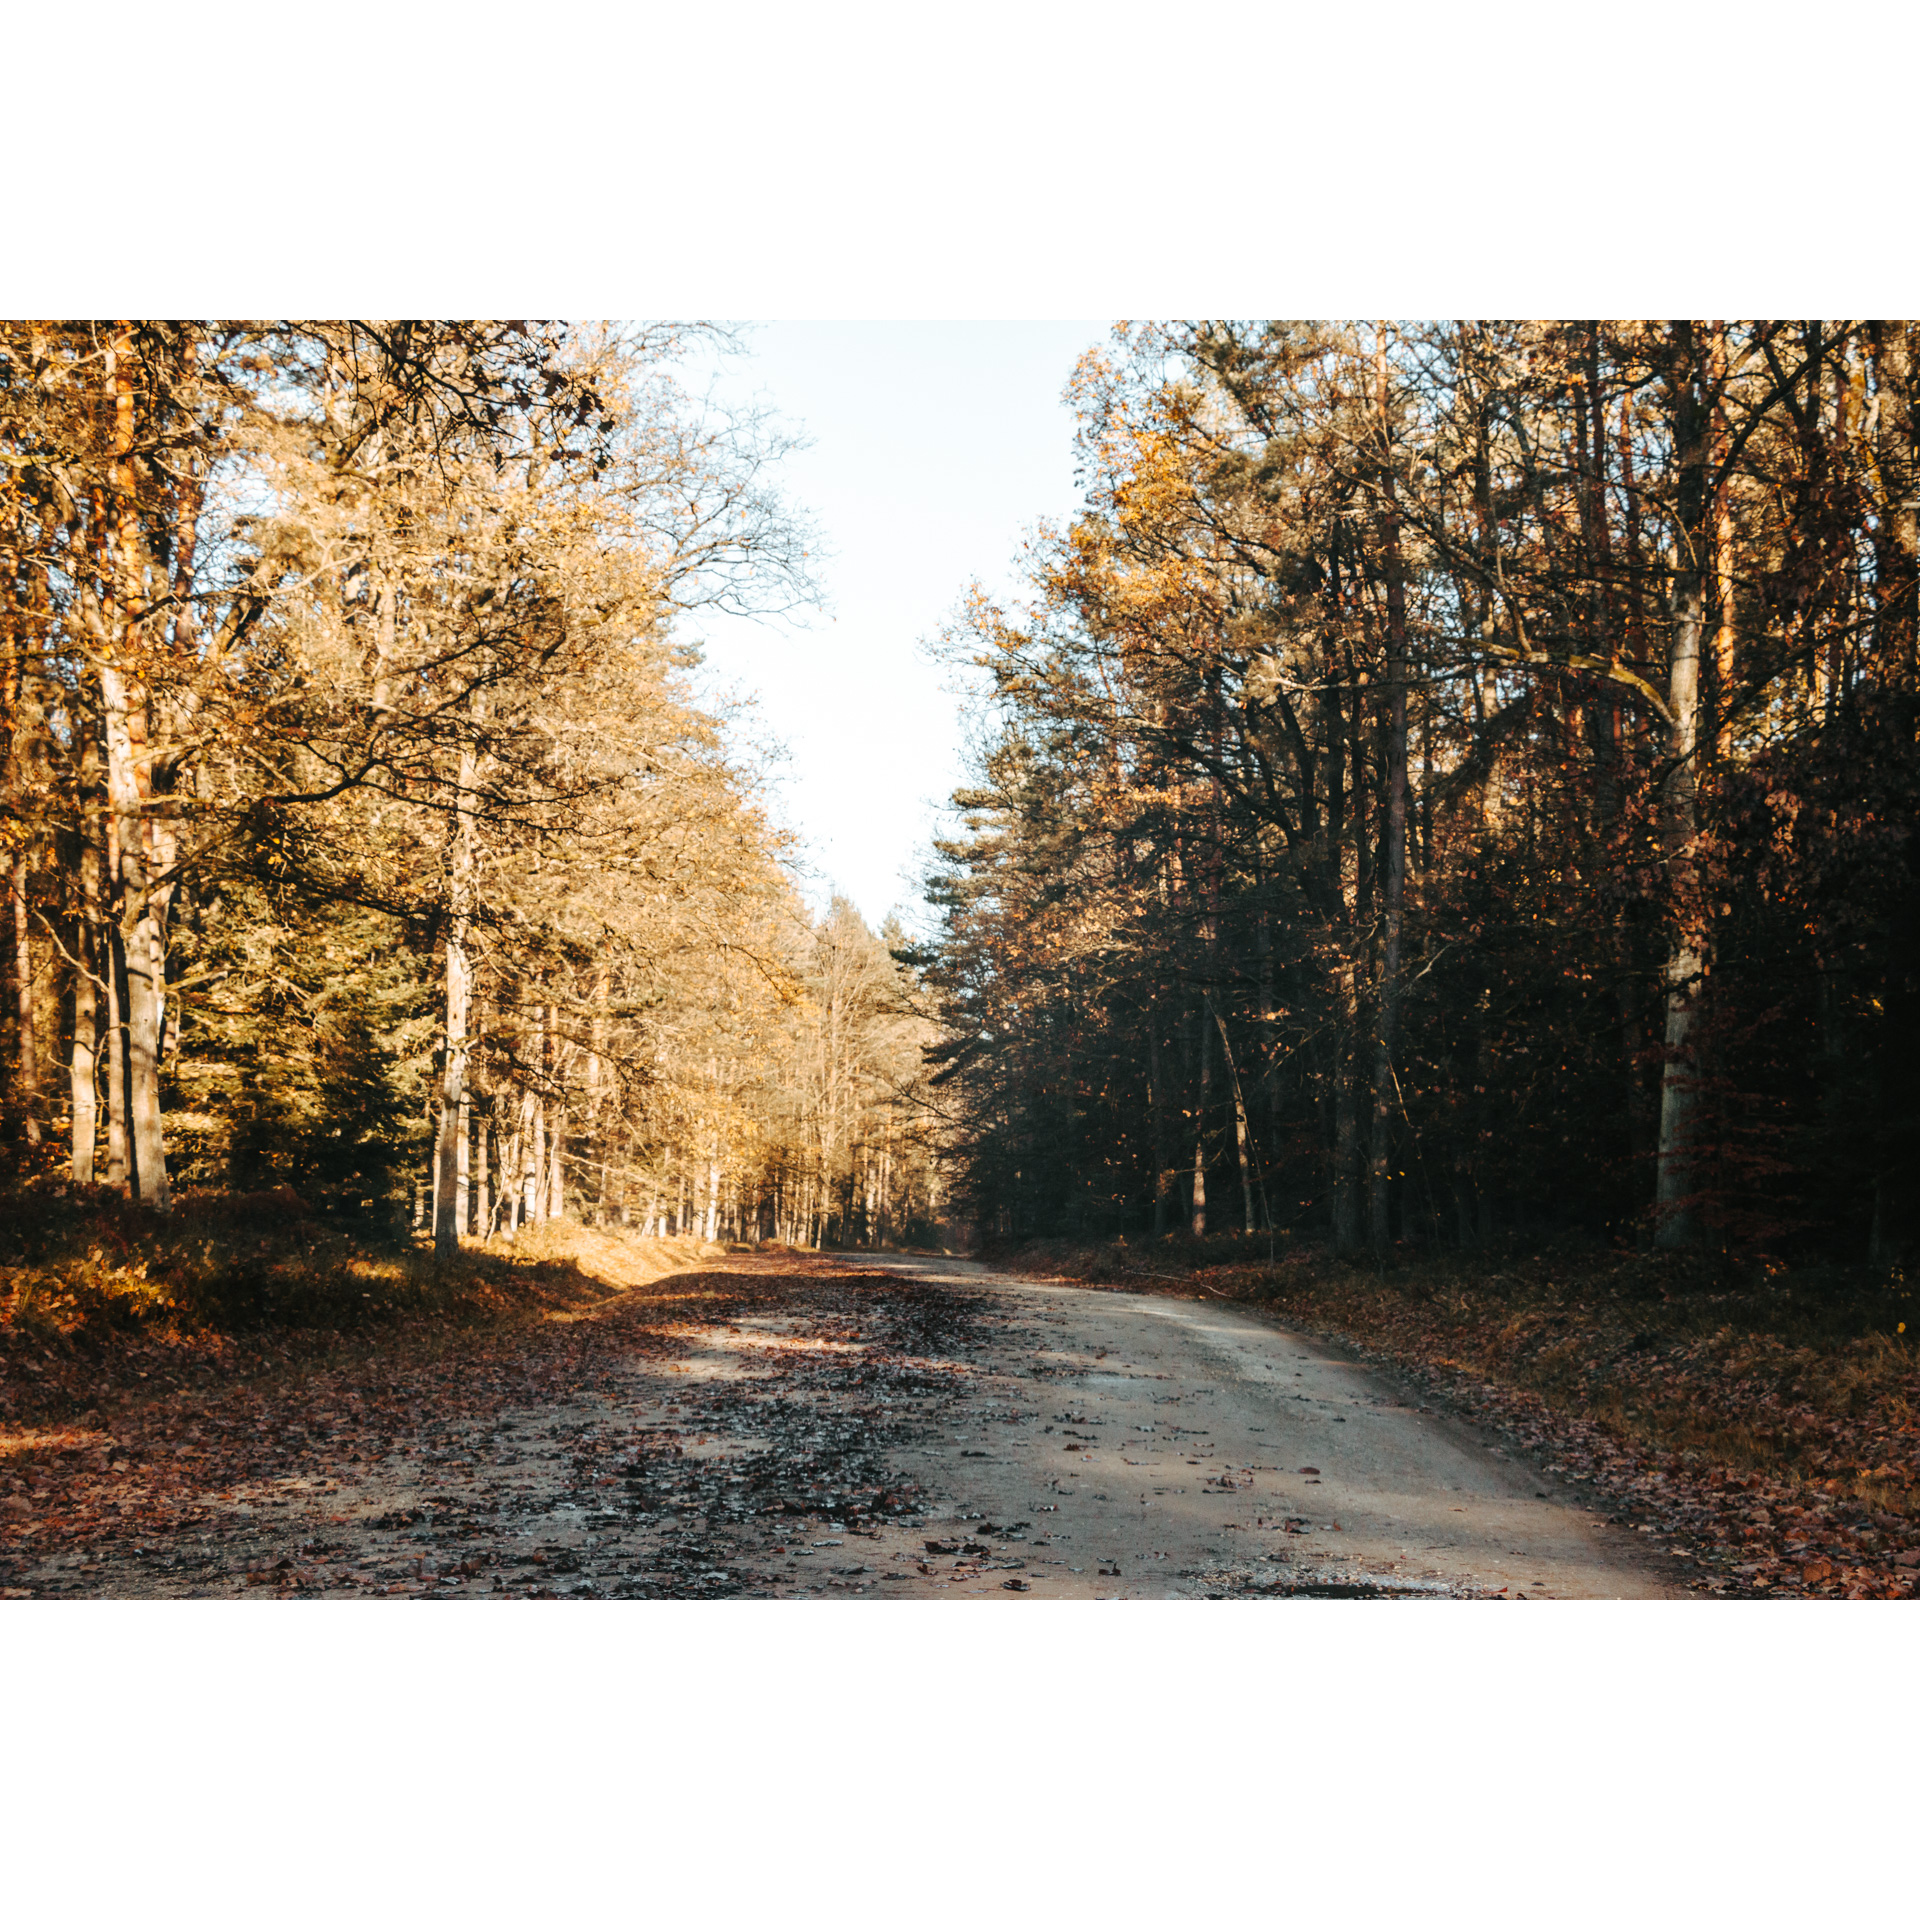 A gravel road leading through the forest with orange leaves on the trees and the ground